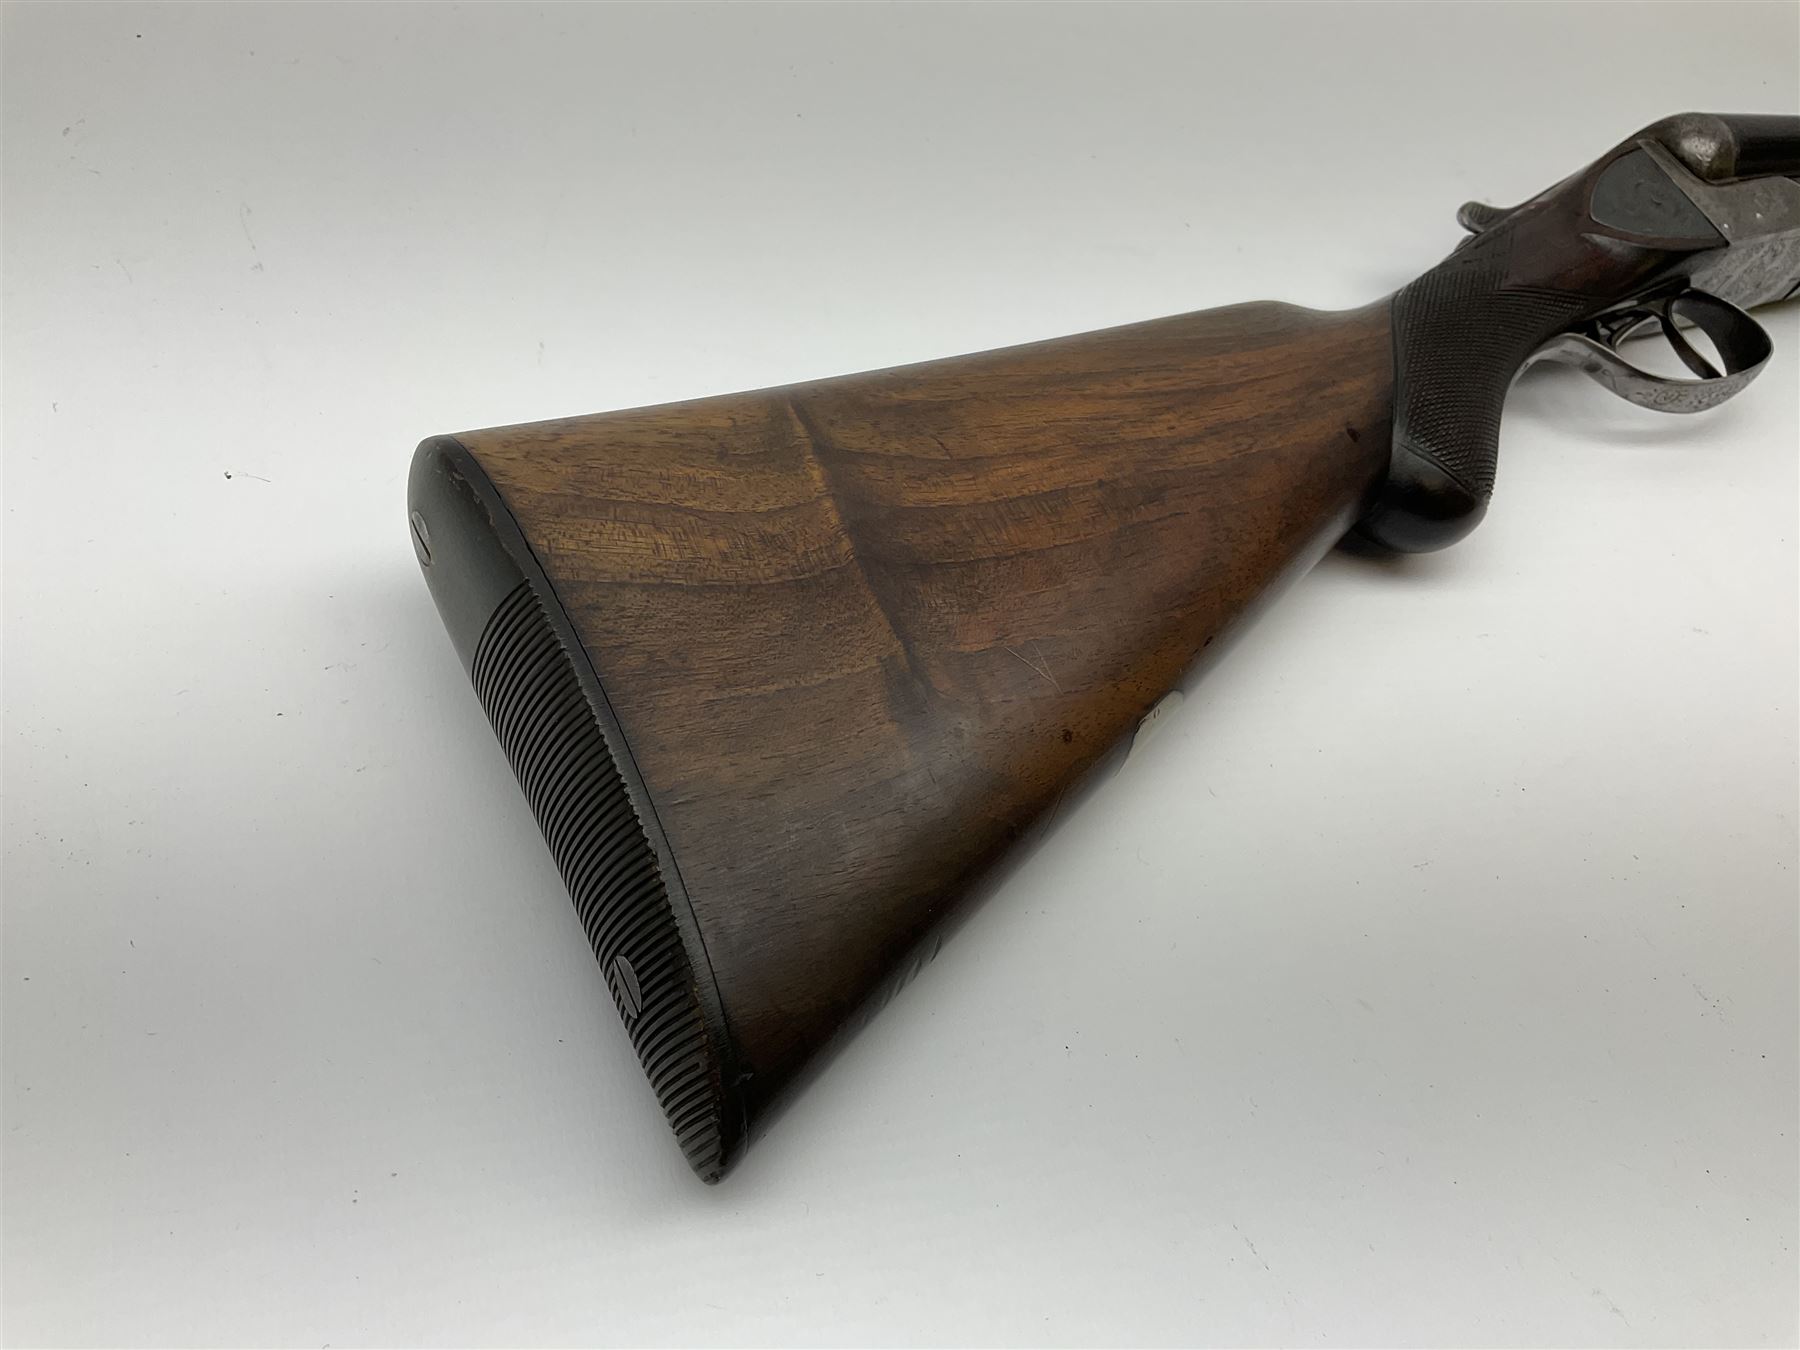 Belgian 12-bore side-by-side double barrel boxlock ejector sporting gun with dummy sidelock plates - Image 2 of 10